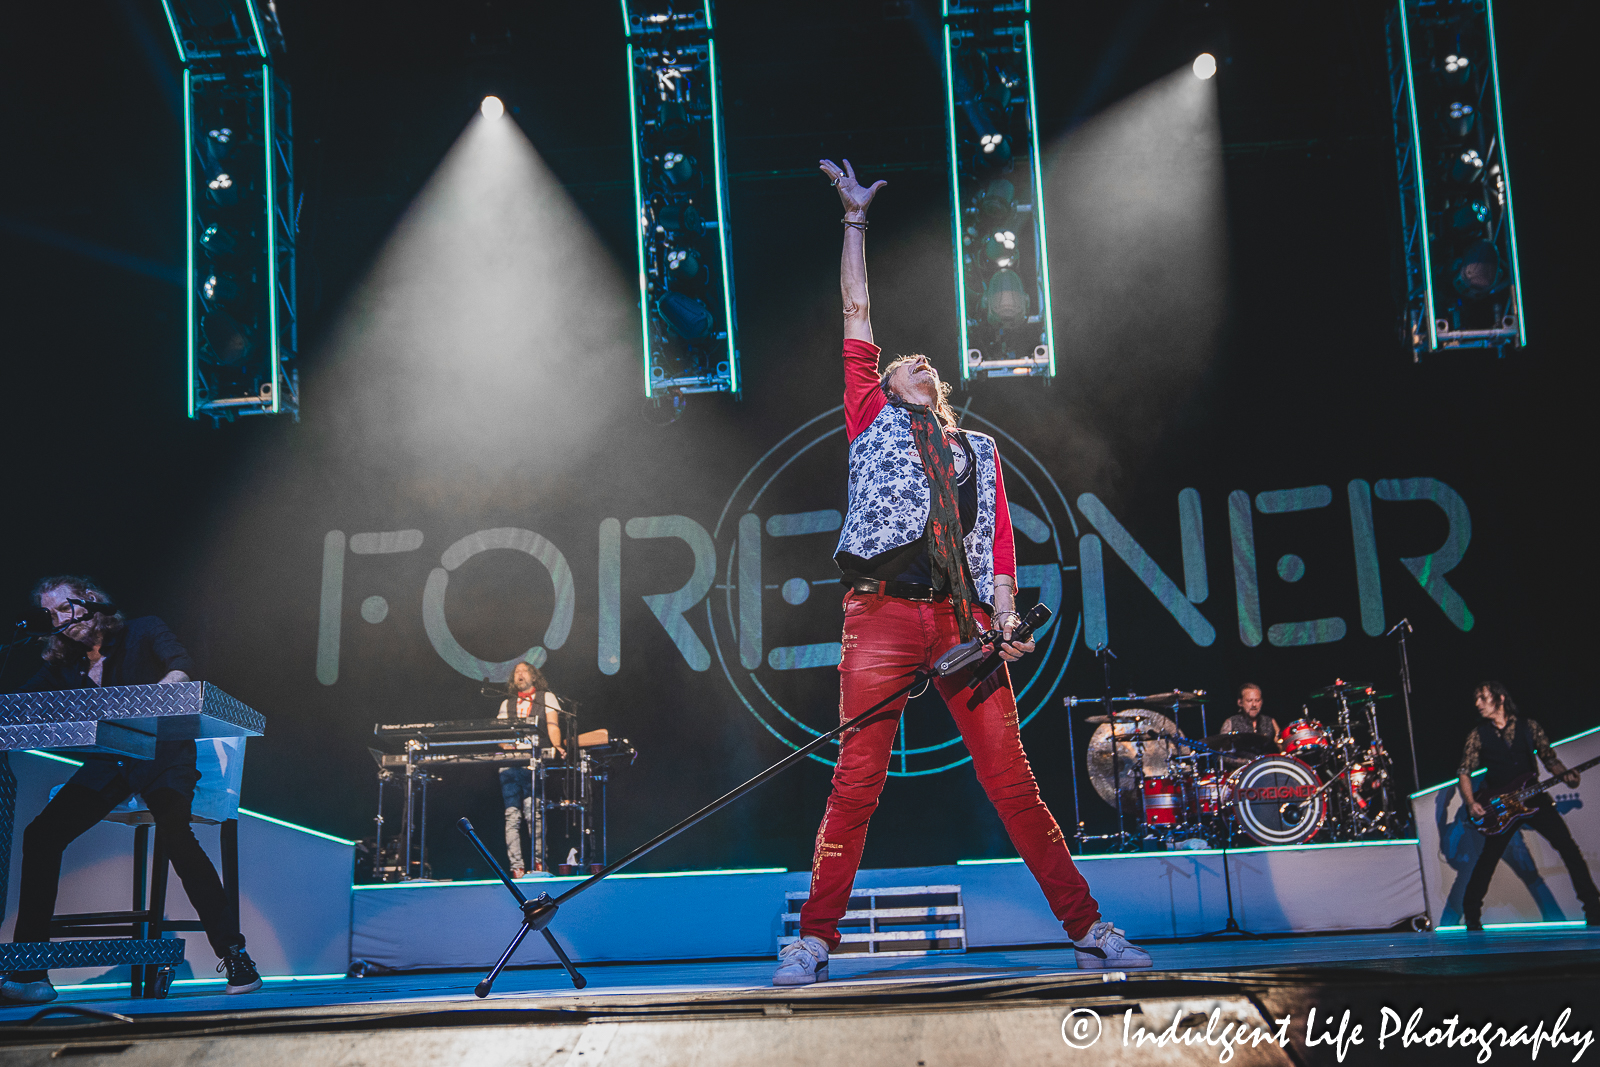 Foreigner live in concert performing "Cold as Ice" during "The Historic Farewell Tour" at Starlight Theatre in Kansas City, MO on July 18, 2023.